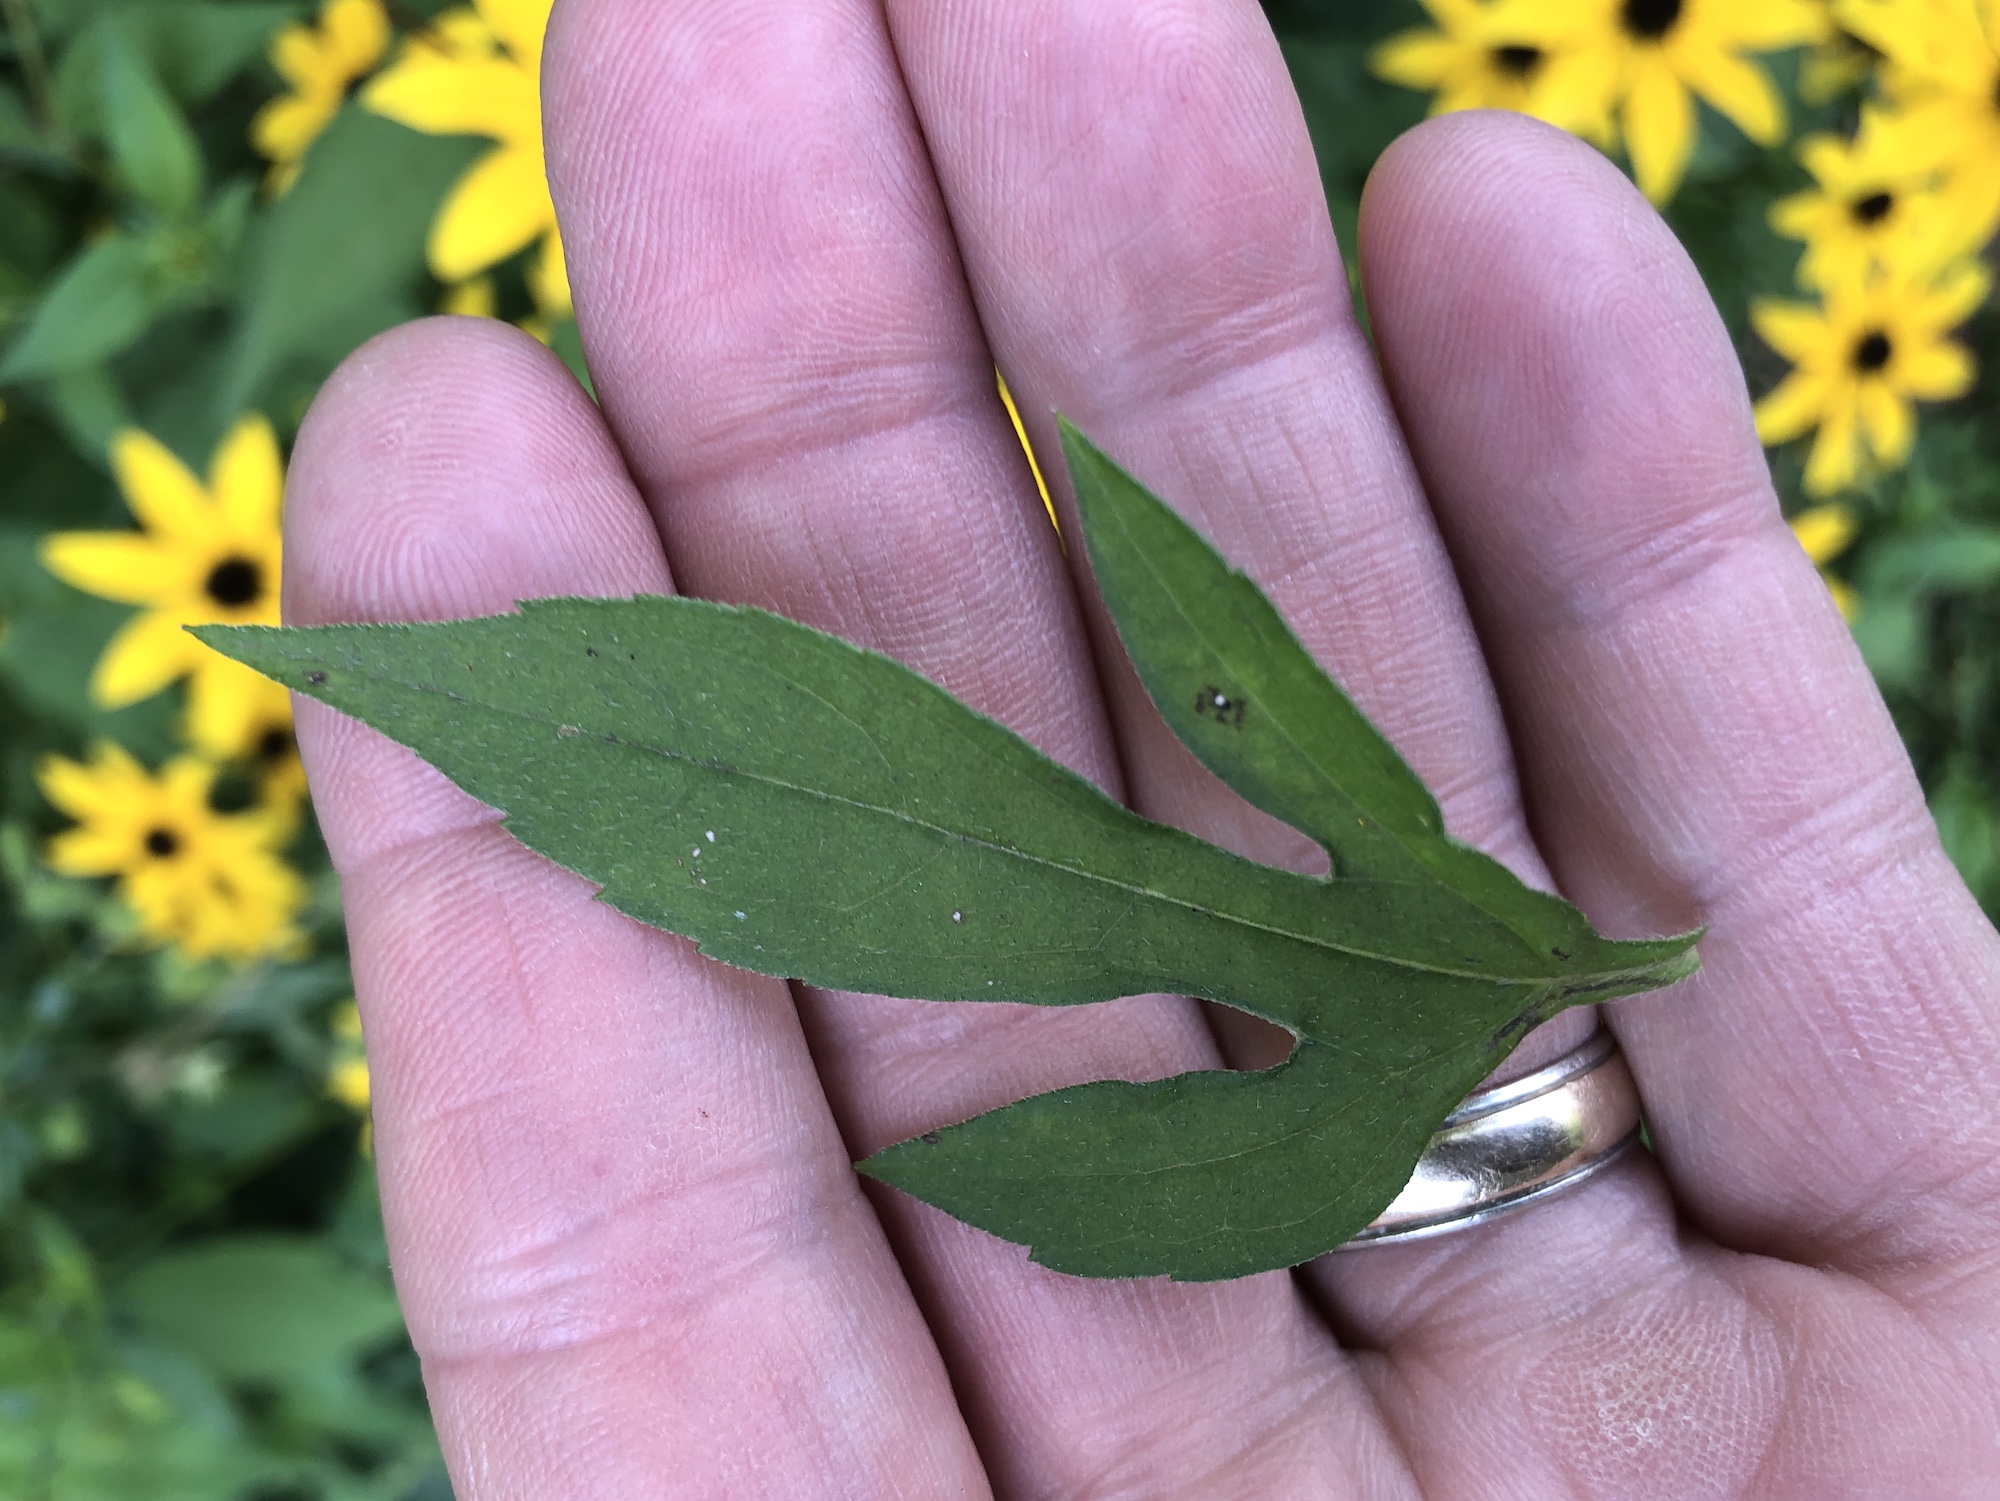 Brown-eyed Susan leaf on banks of Marion Dunn Pond in Madison, Wisconsin on July 25, 2019.